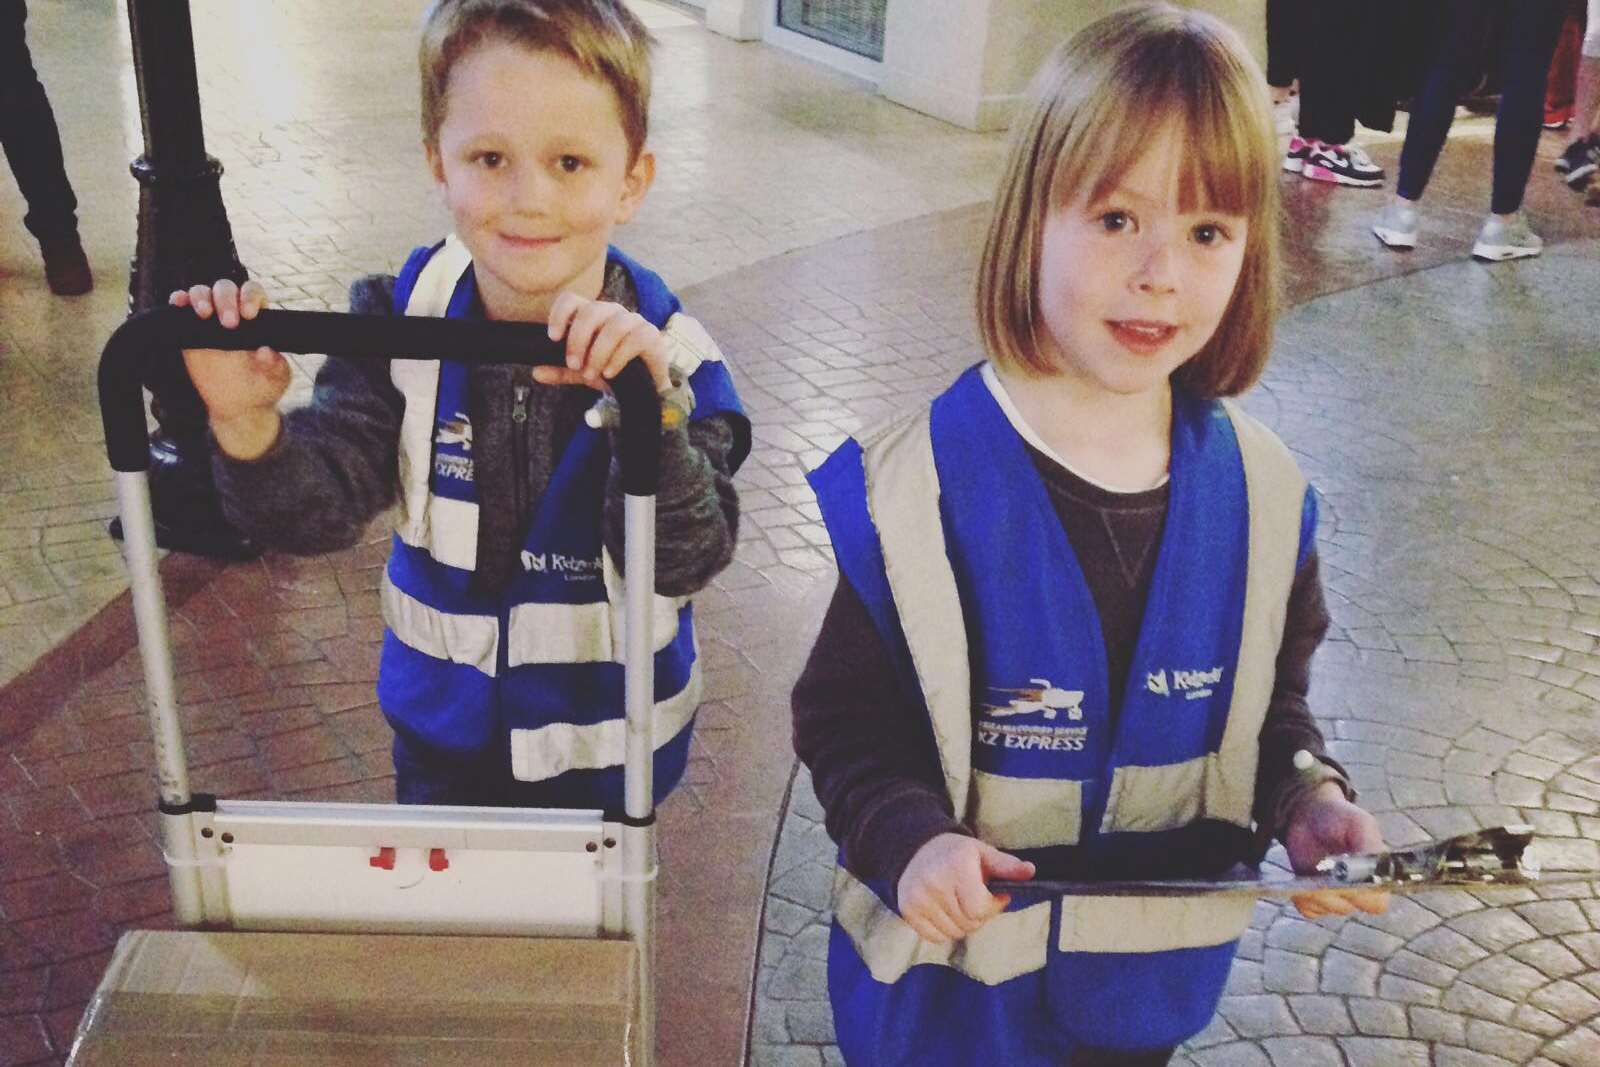 A bit of teamwork to deliver the packages in Kidzania